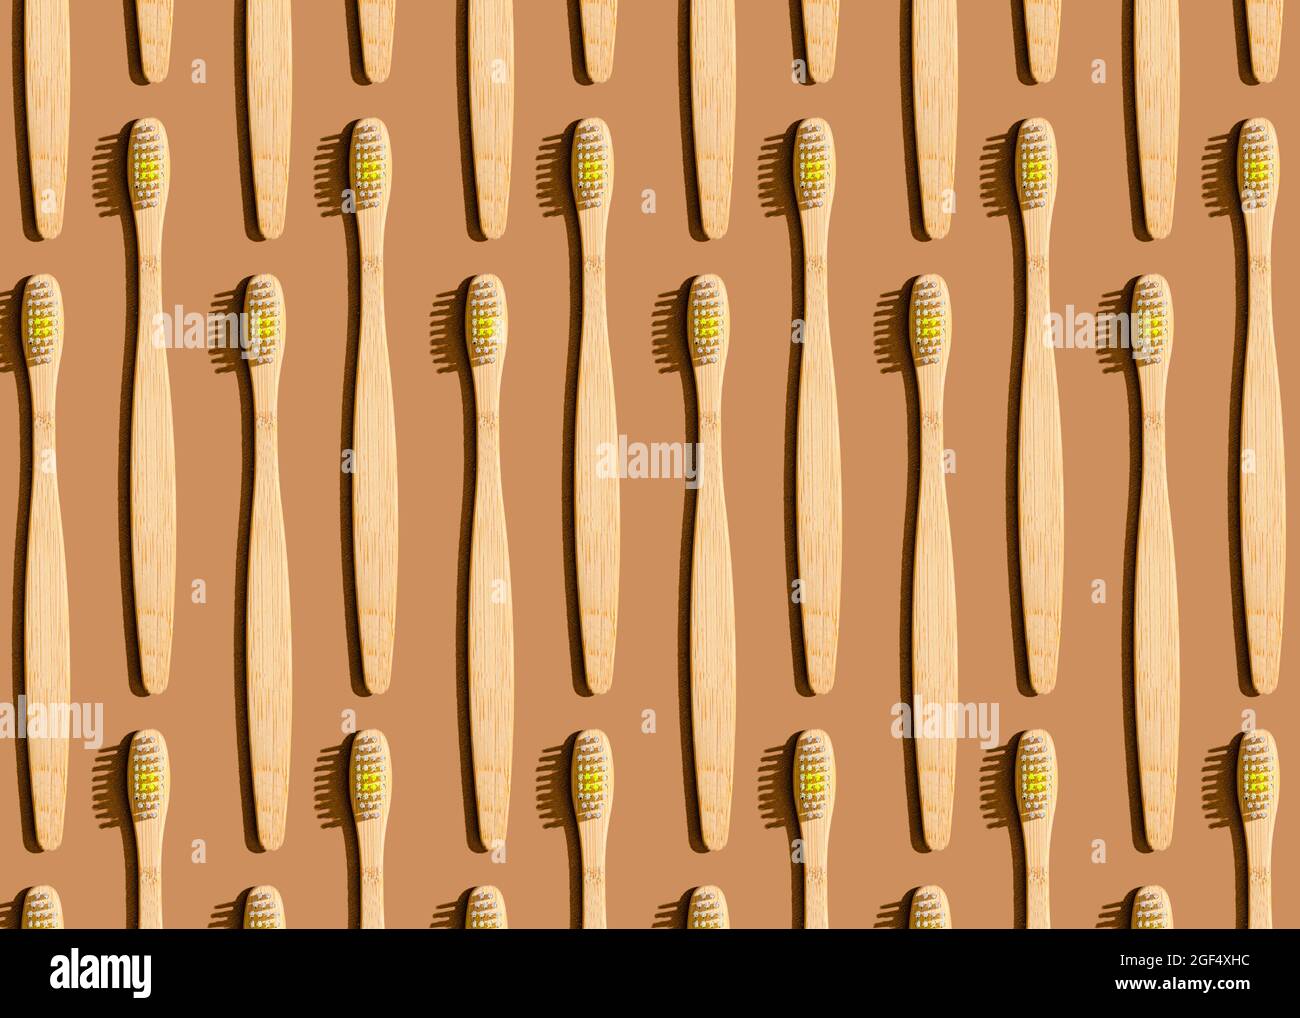 Pattern of wooden toothbrushes flat laid against brown background Stock Photo